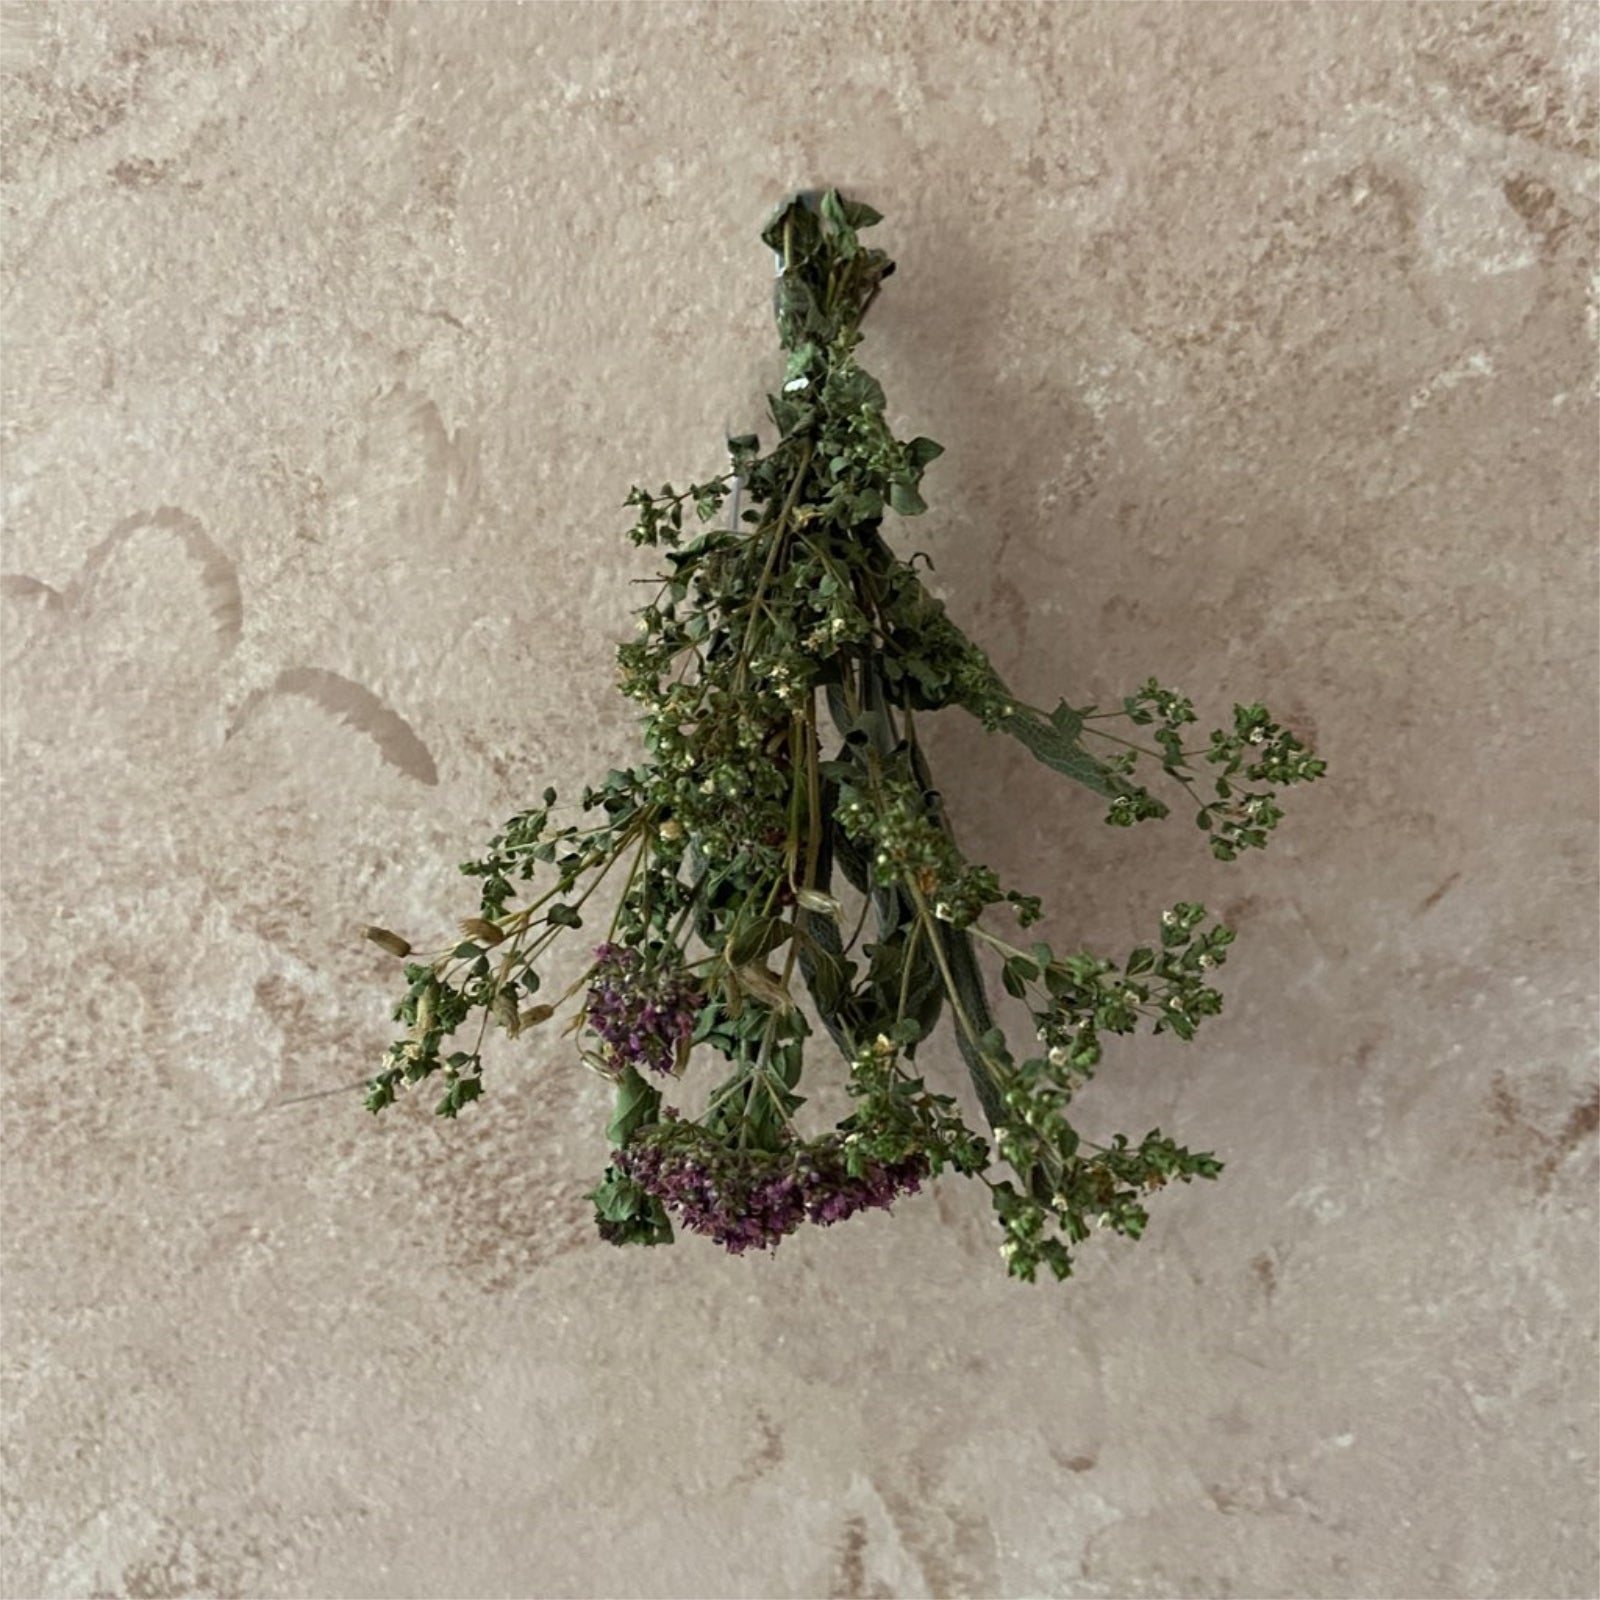 Garden Witches Herb Bundle - 13 Moons